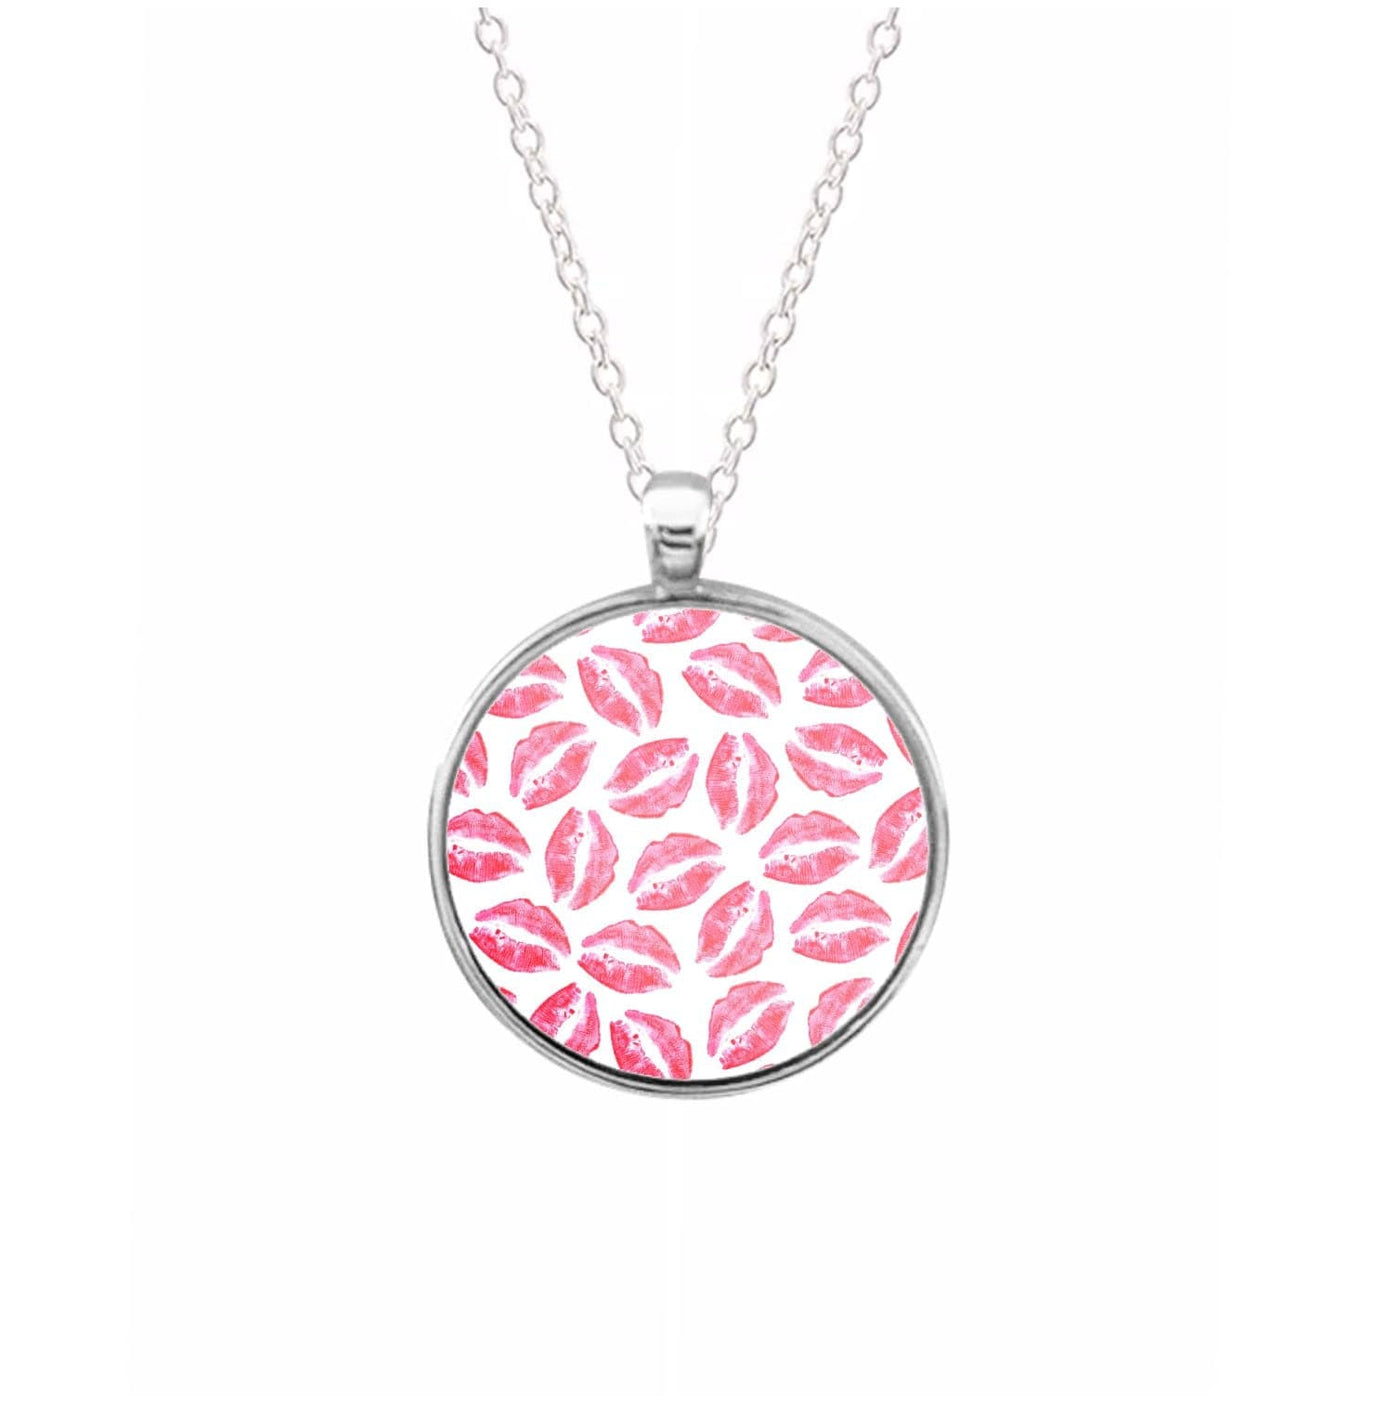 Kisses - Valentine's Day Necklace